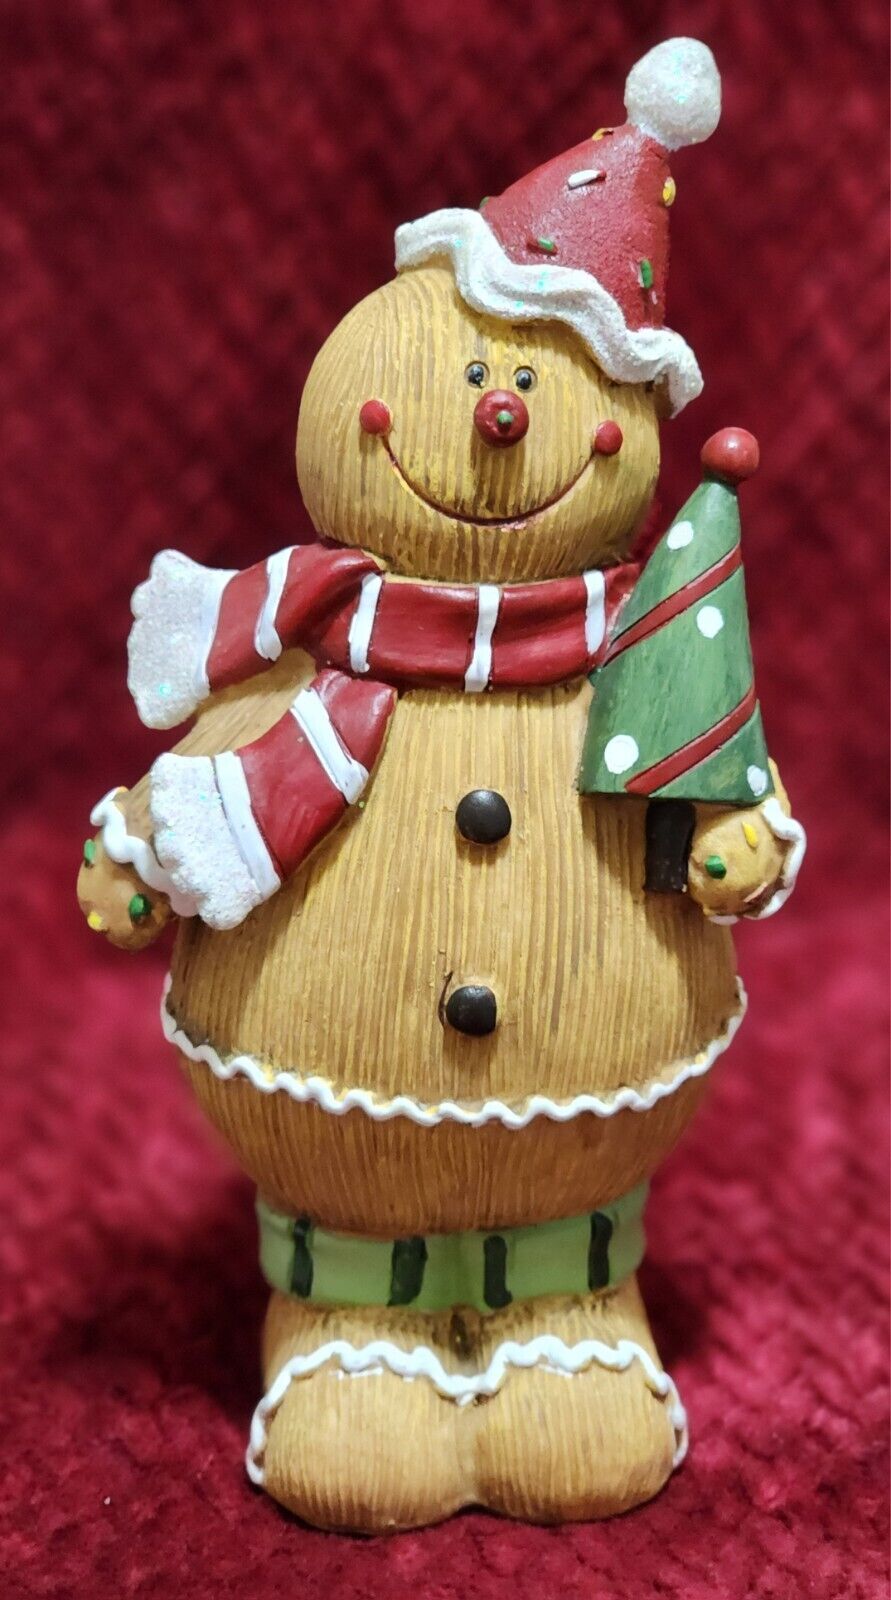 Vintage Tii Collections Gingerbread Men Figurine Christmas Holiday Decor 7